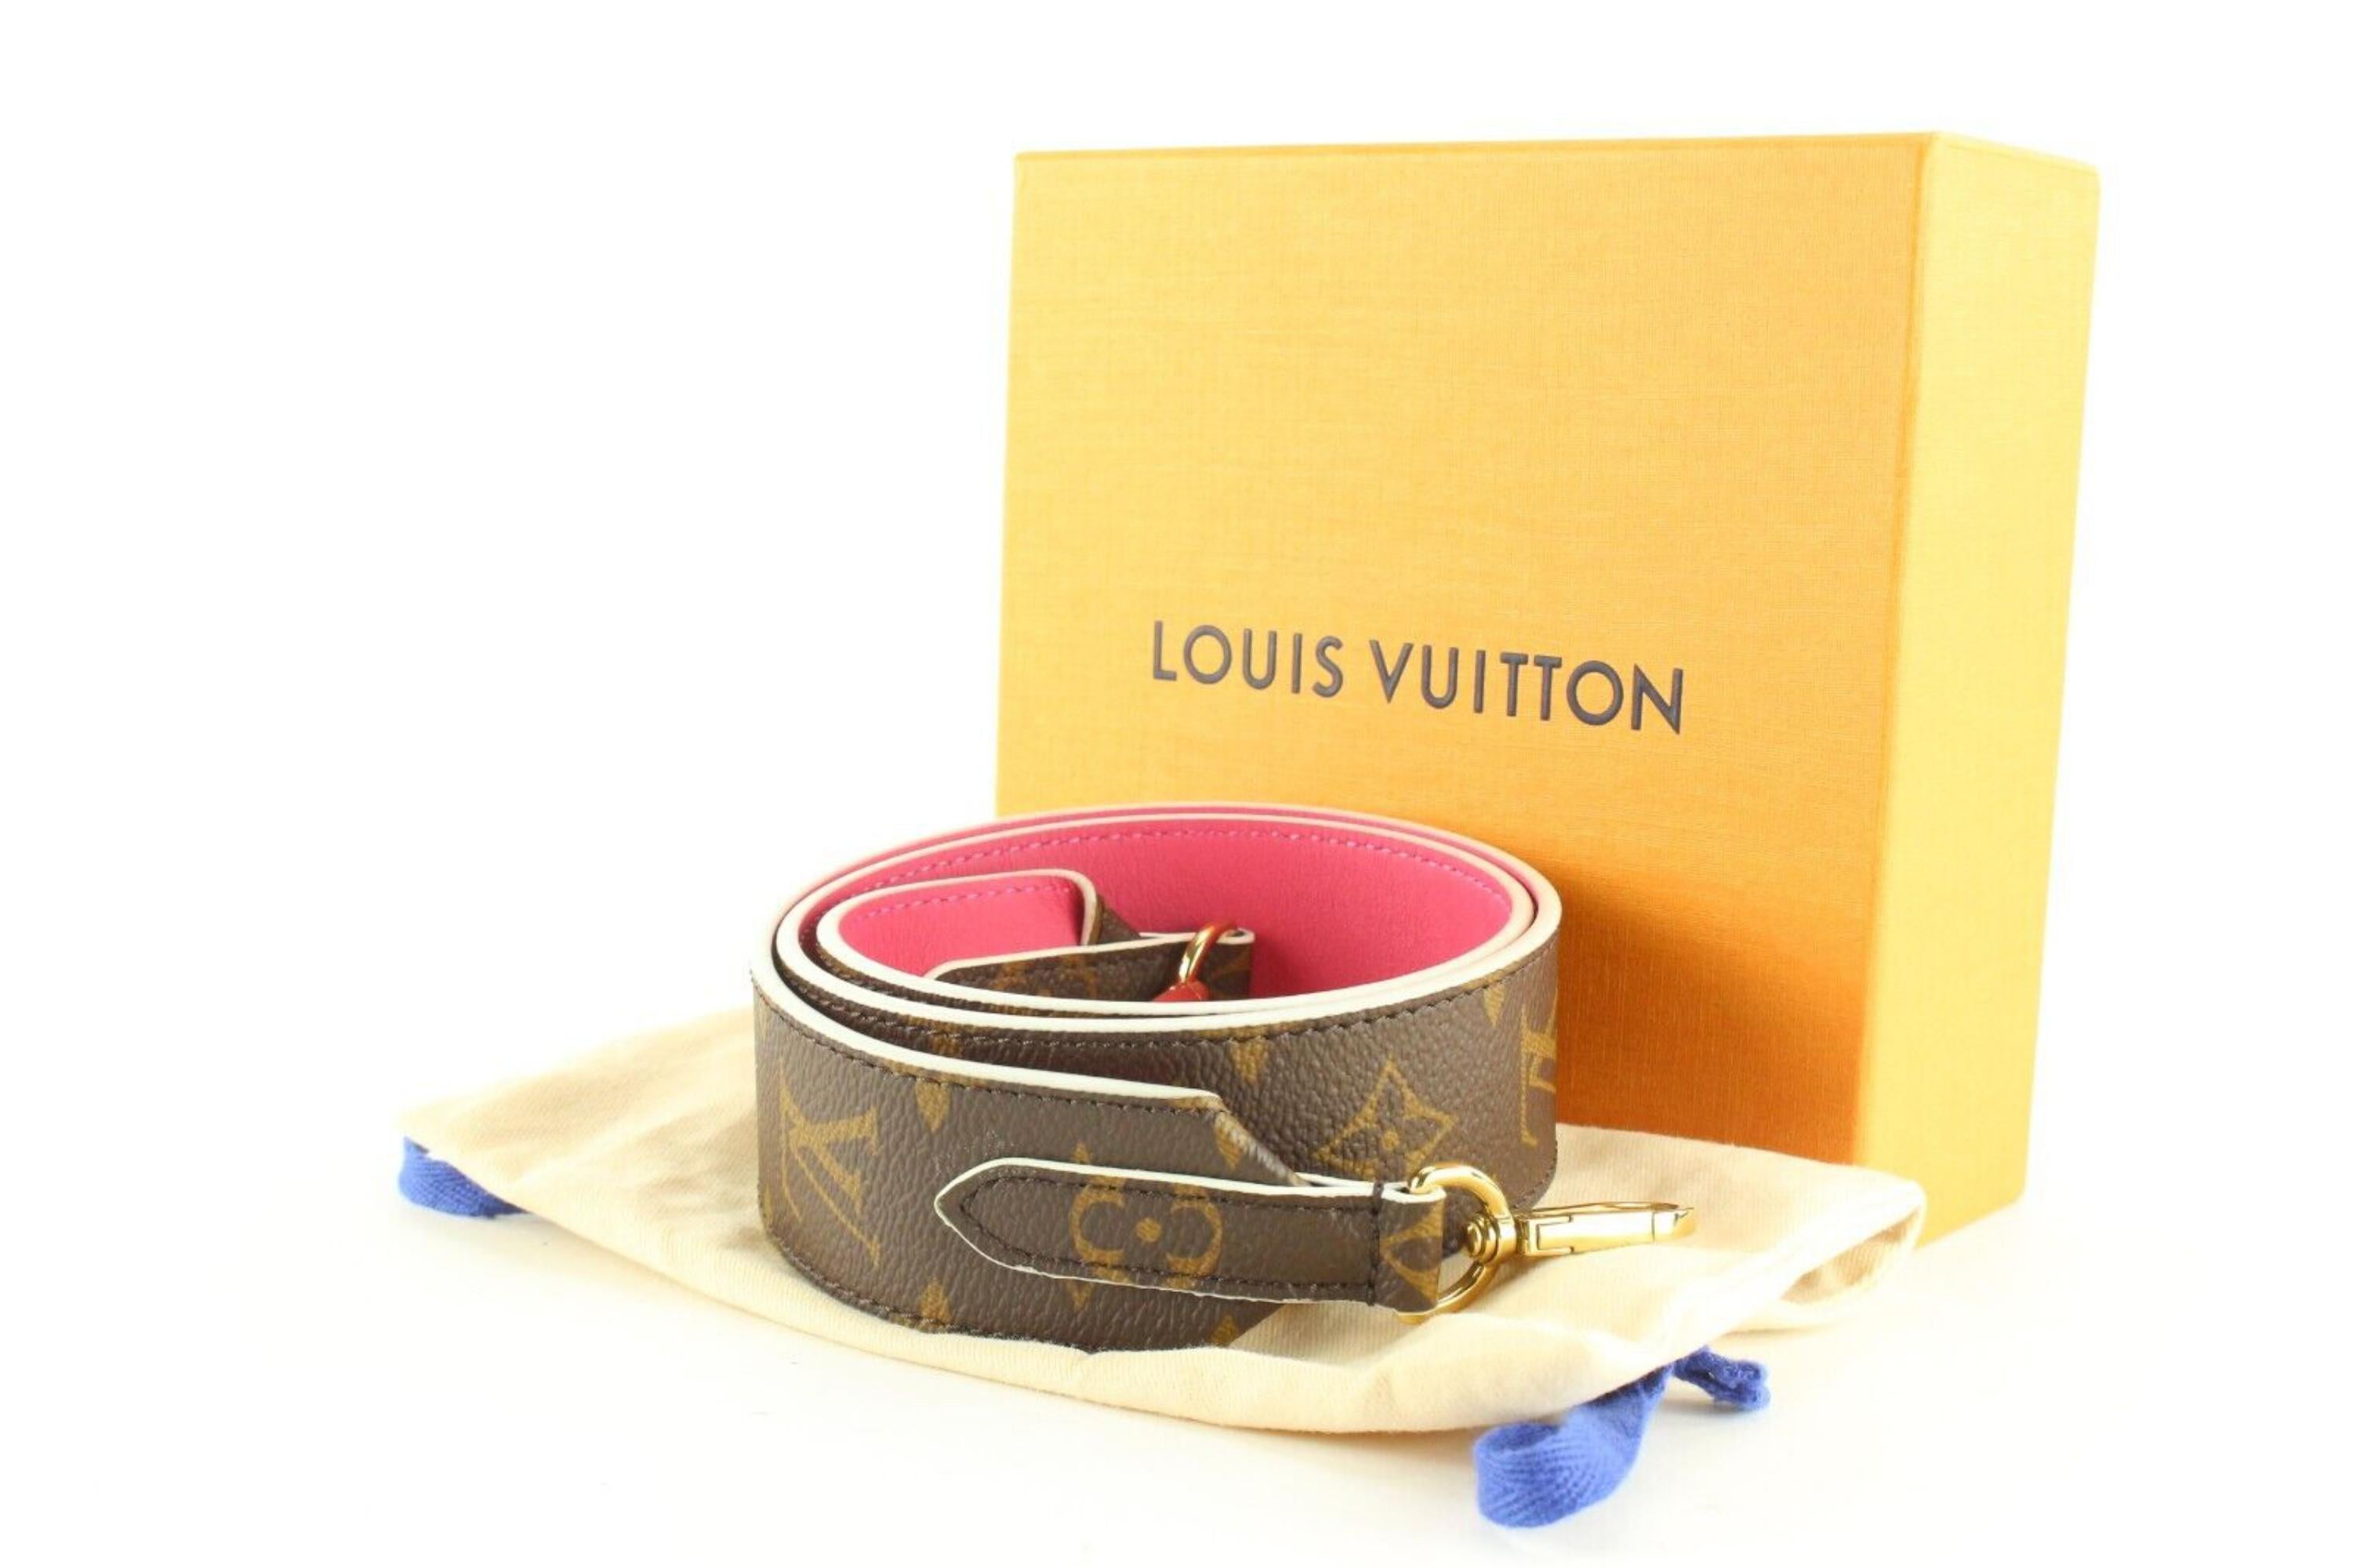 Authentic Louis Vuitton Pink Red Reversible Belt Monogram with Box